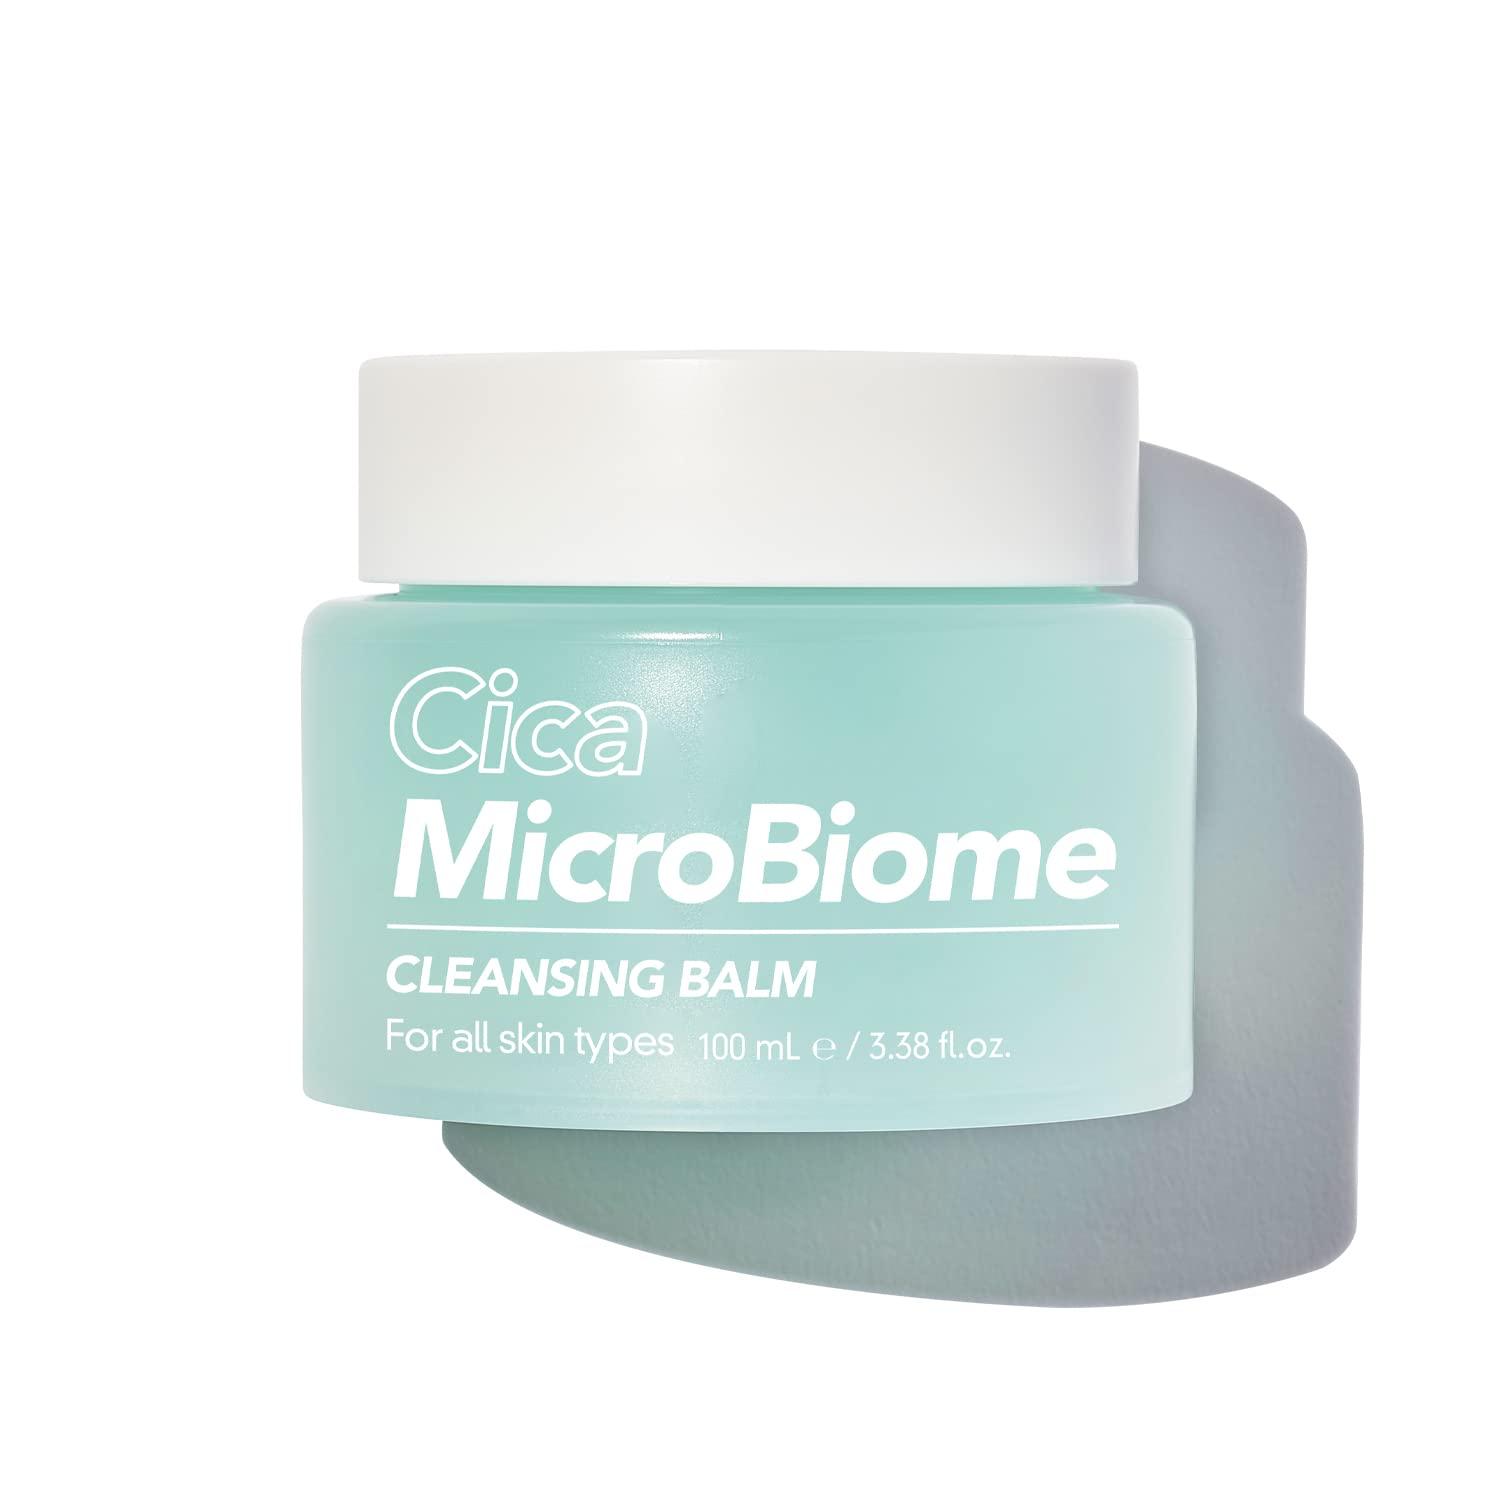 Cica Microbiome Cleansing Balm